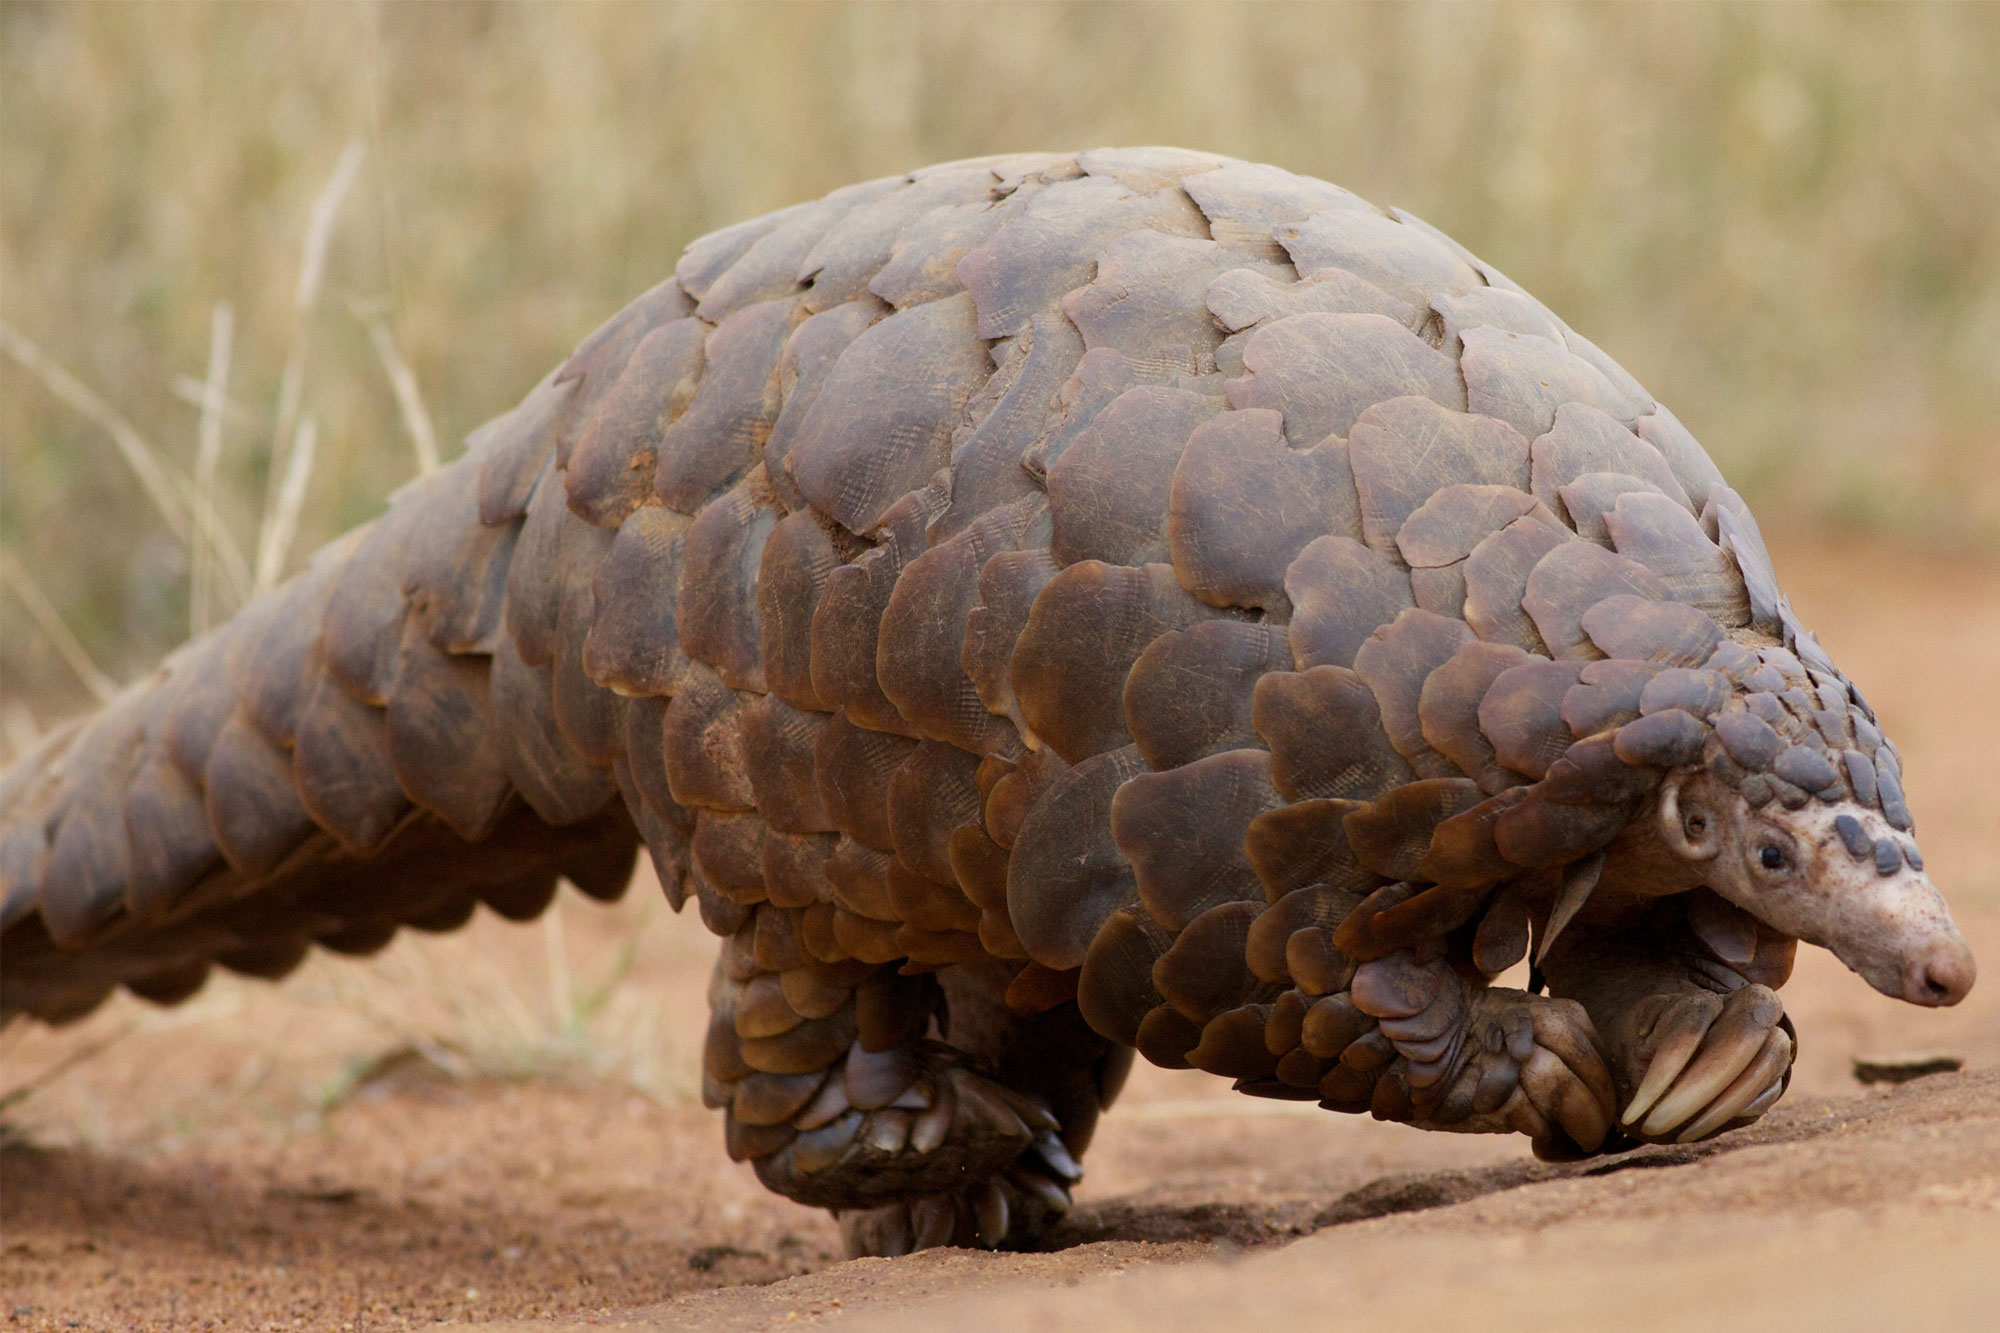 Pangolin at Madikwe Game Reserve in South Africa